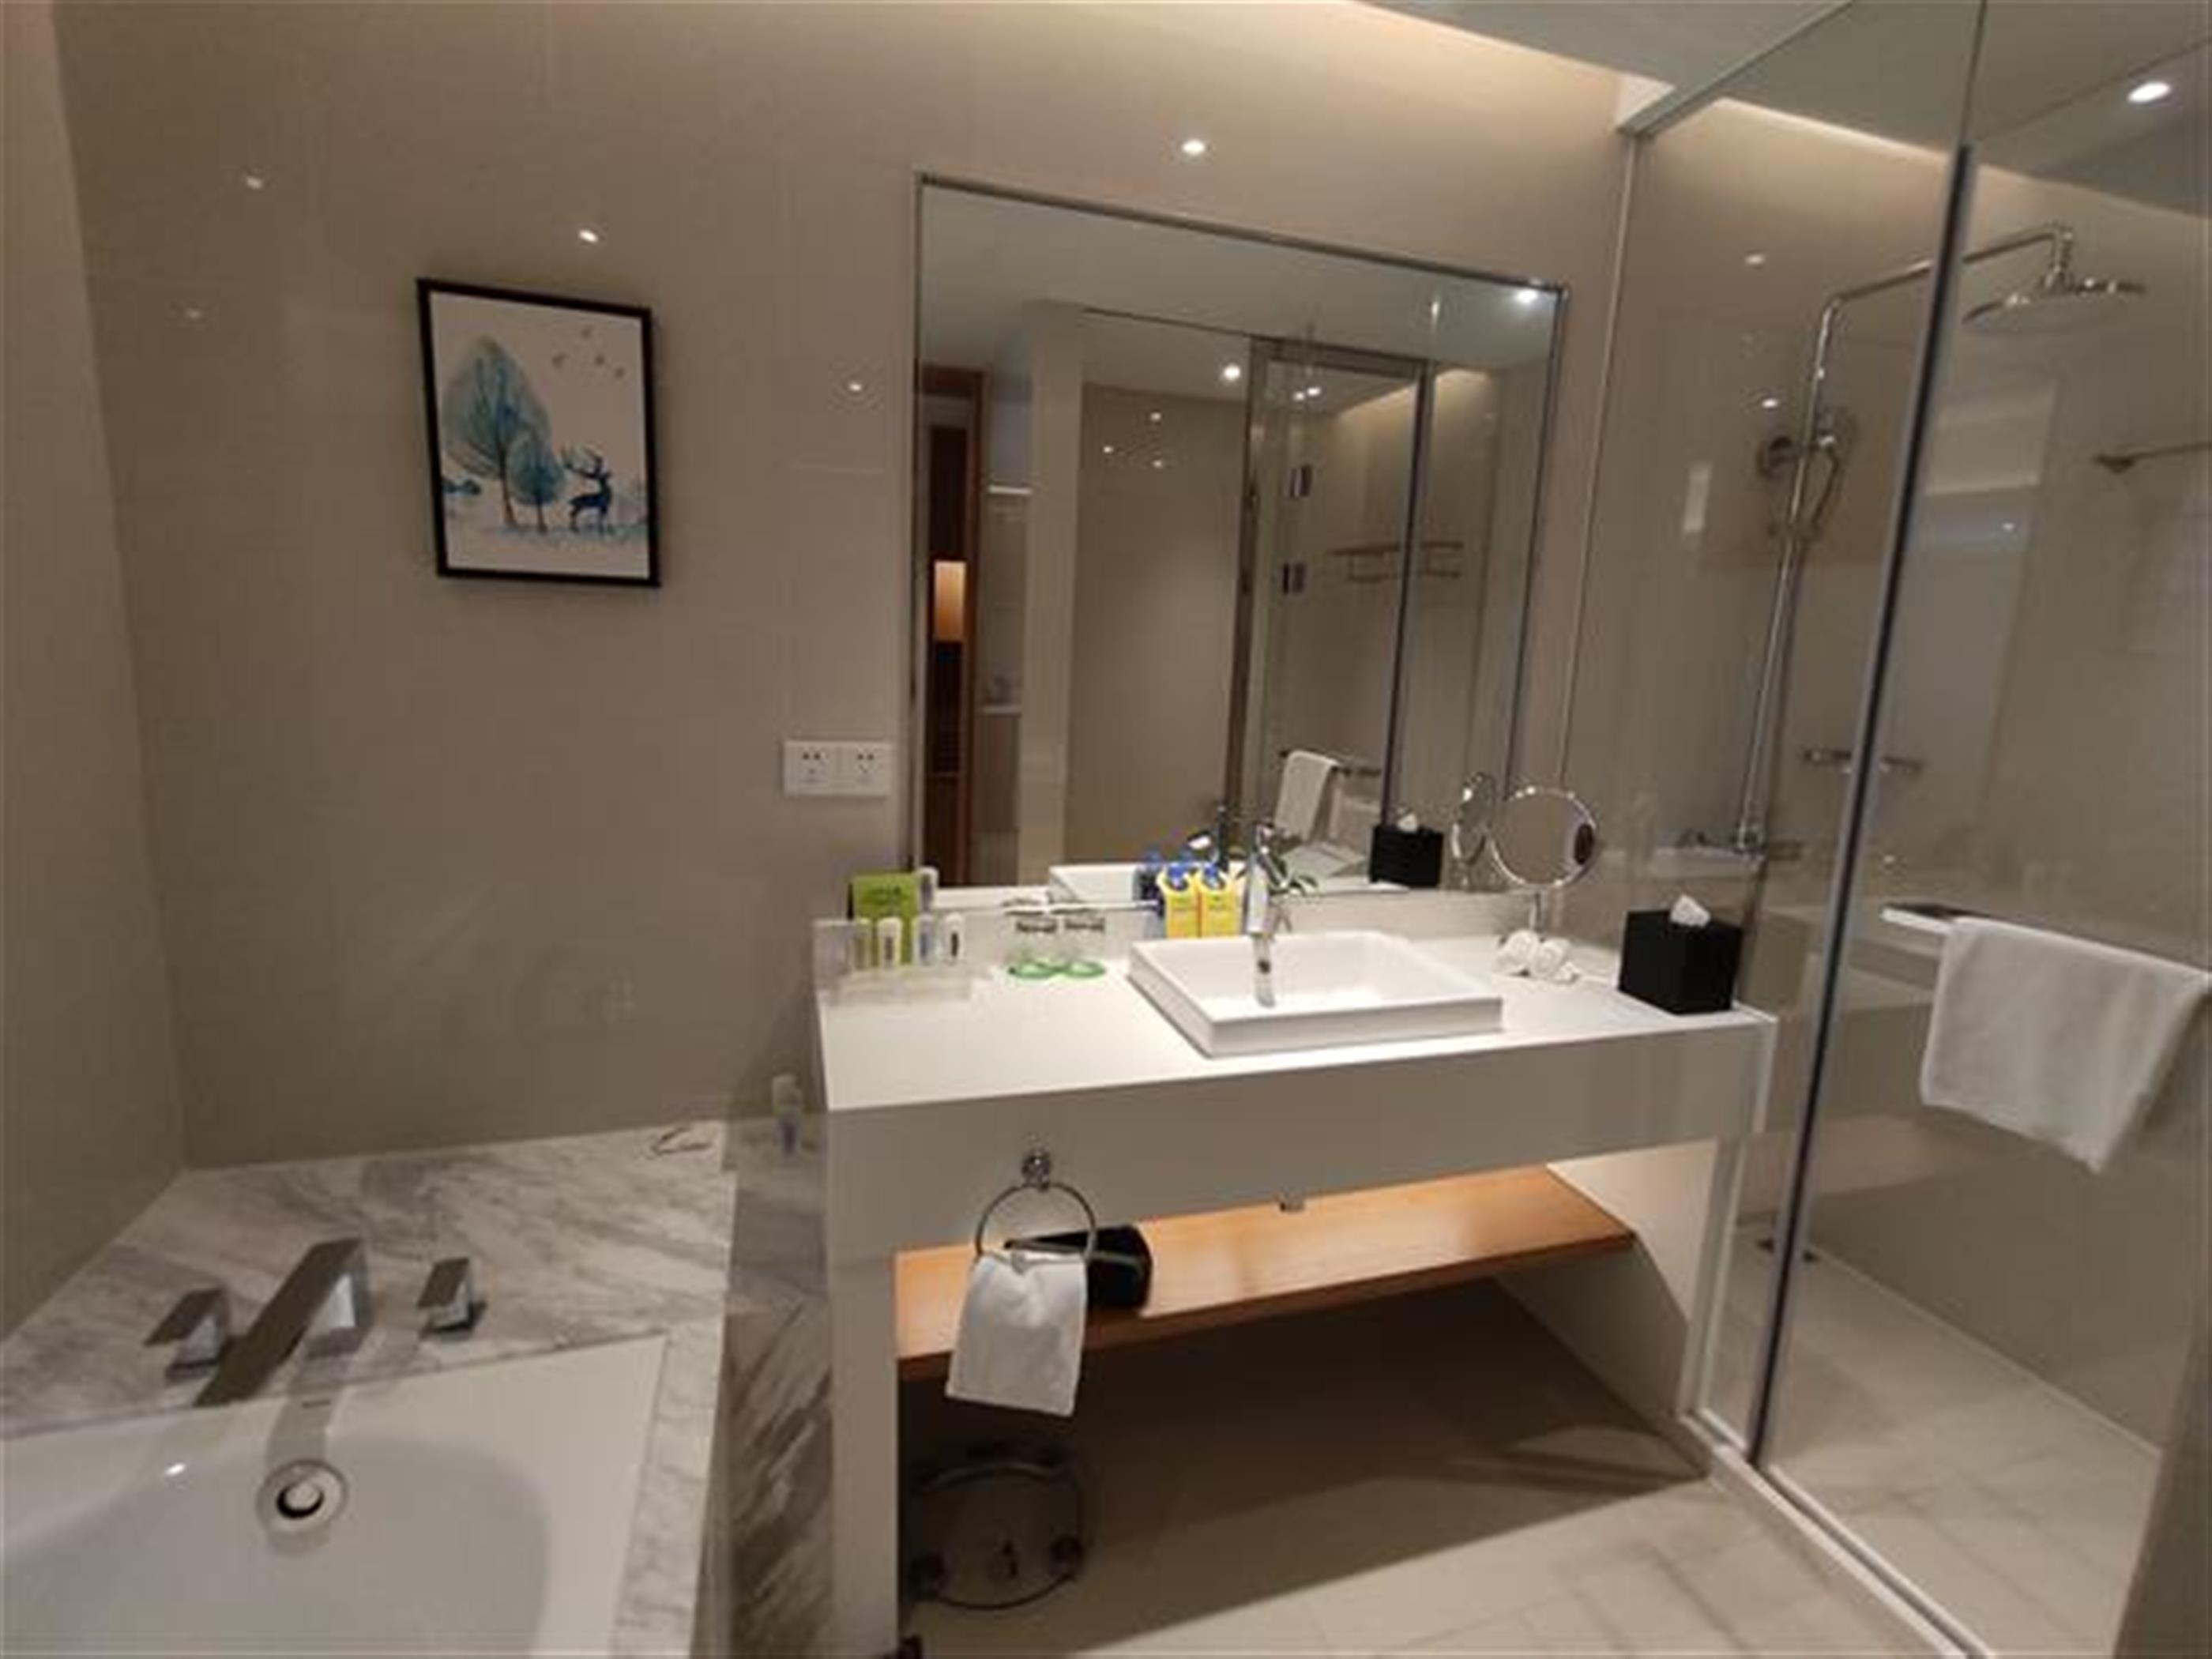 Bathtub Convenient Newly-Renovated 1BR Deluxe Suite Service Apts Nr LN 2 for Rent in Shanghai